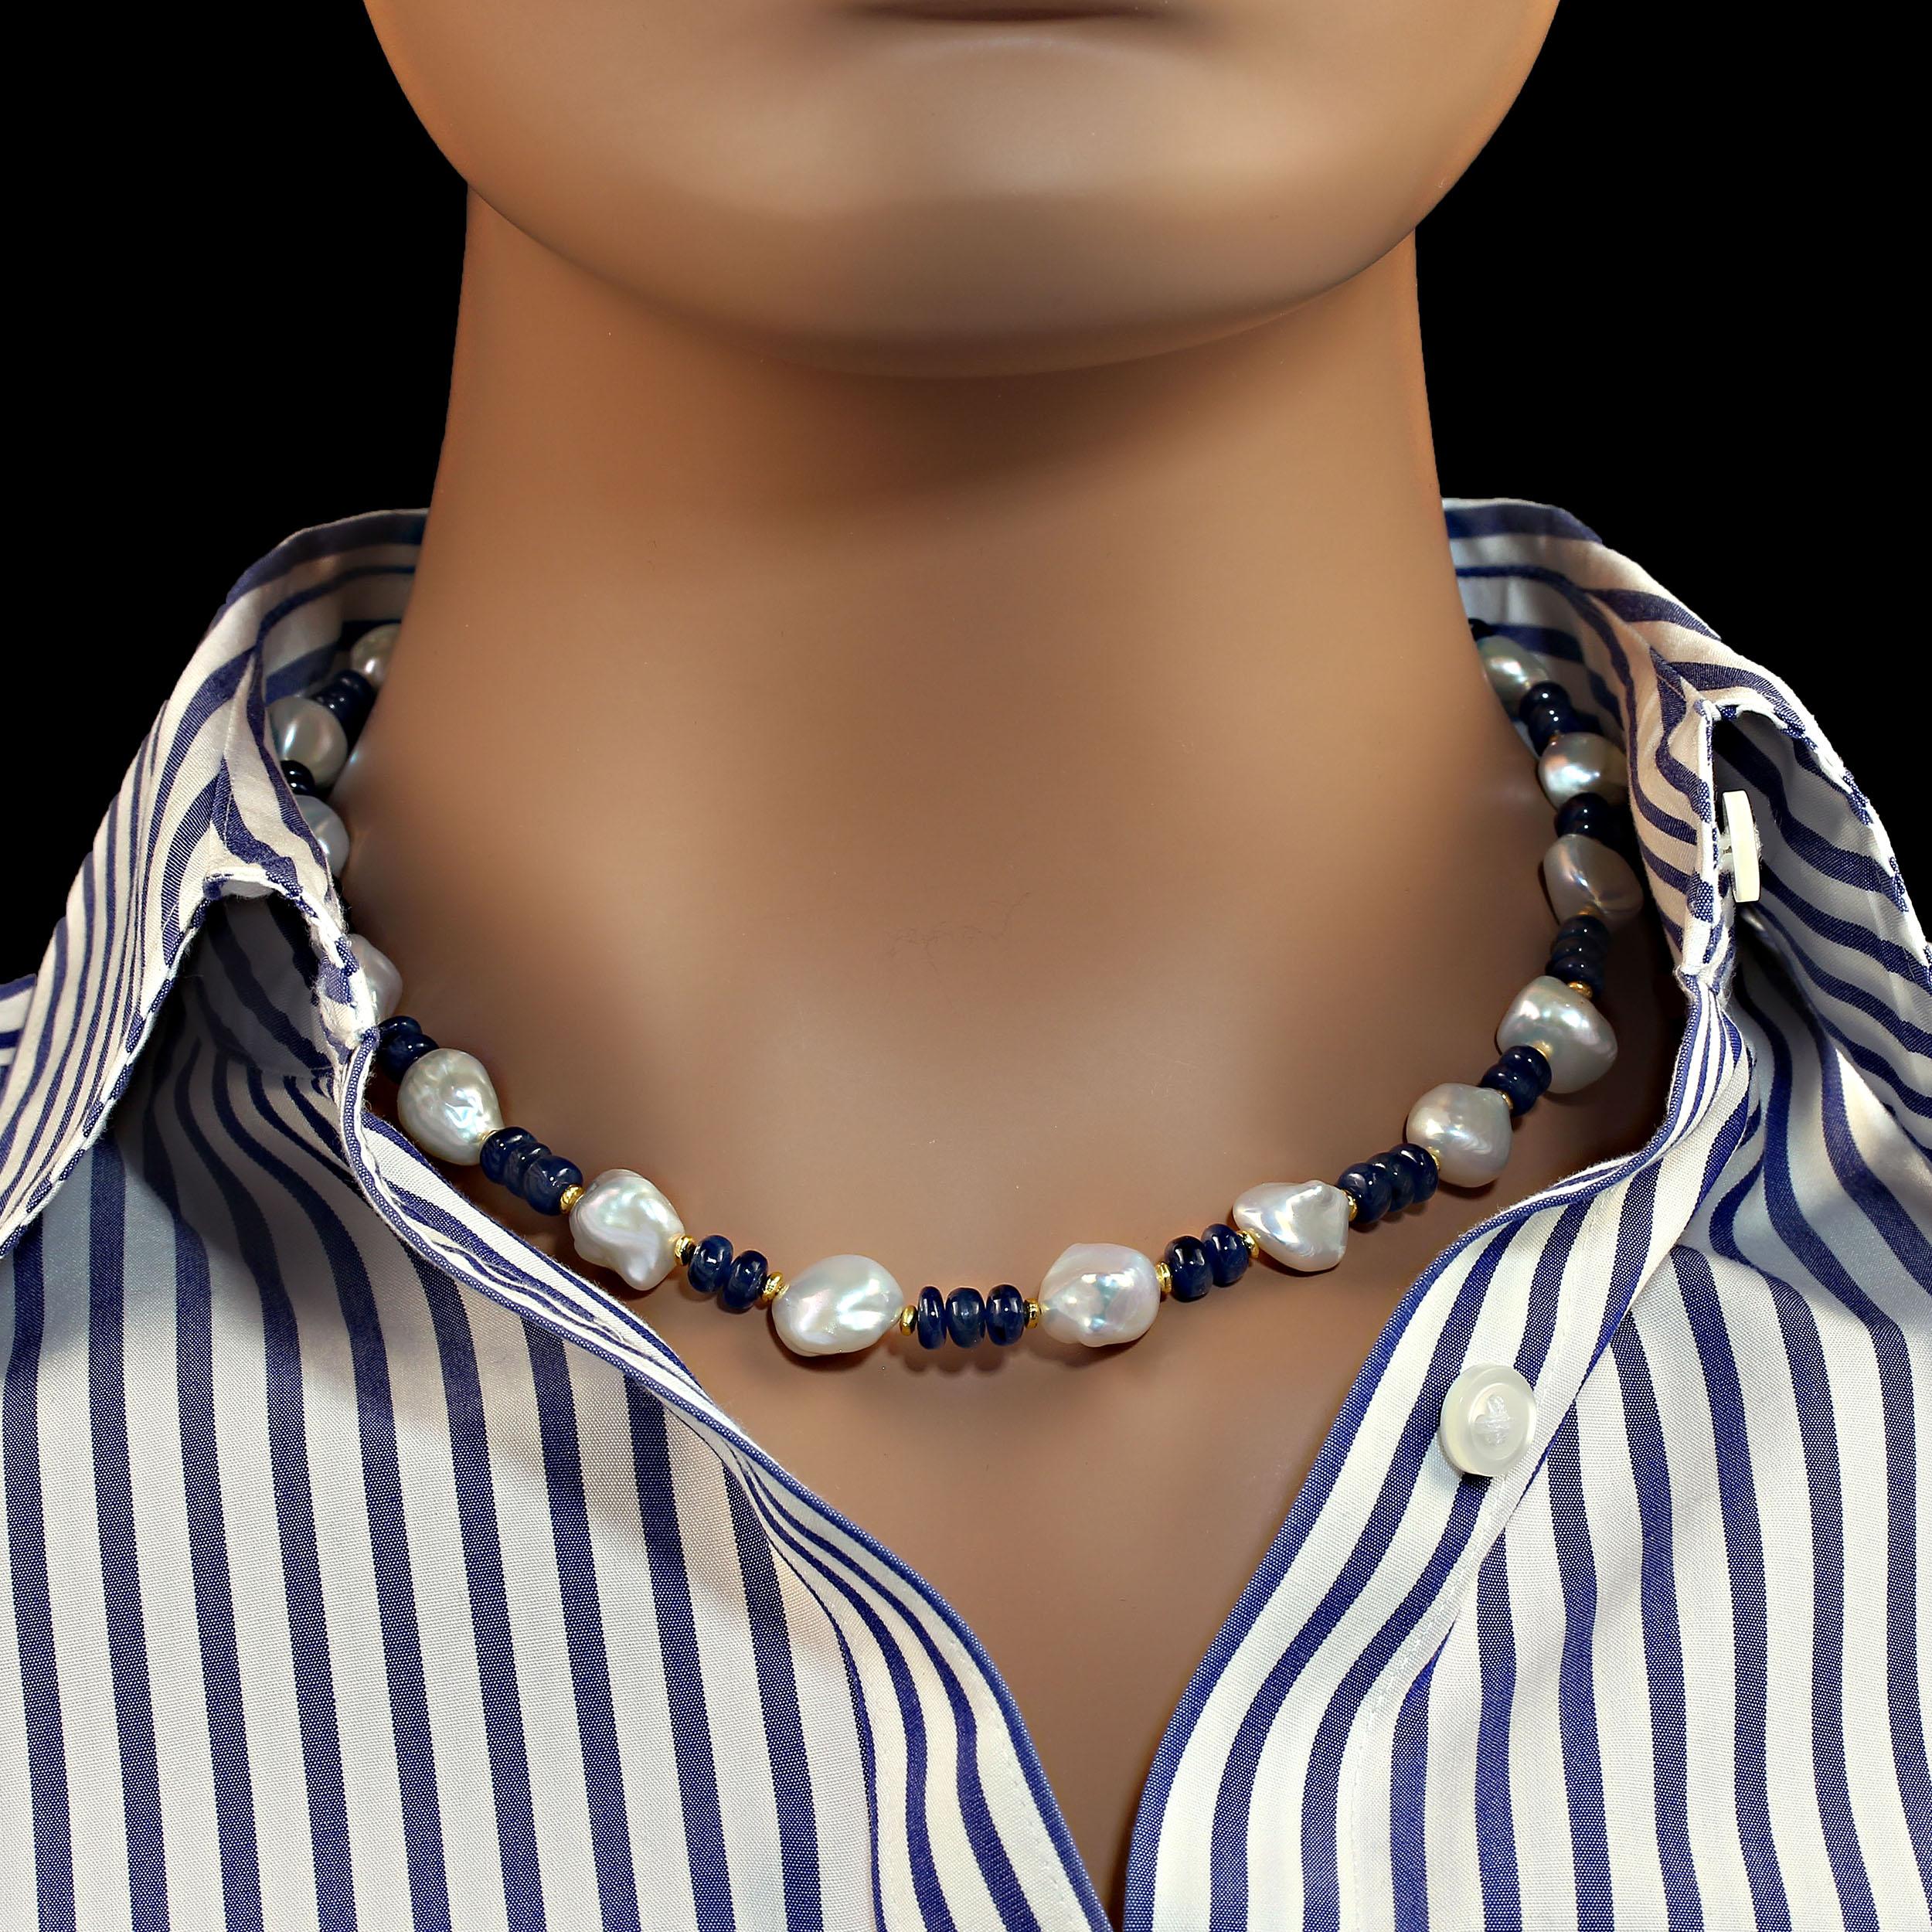 17 inches necklace